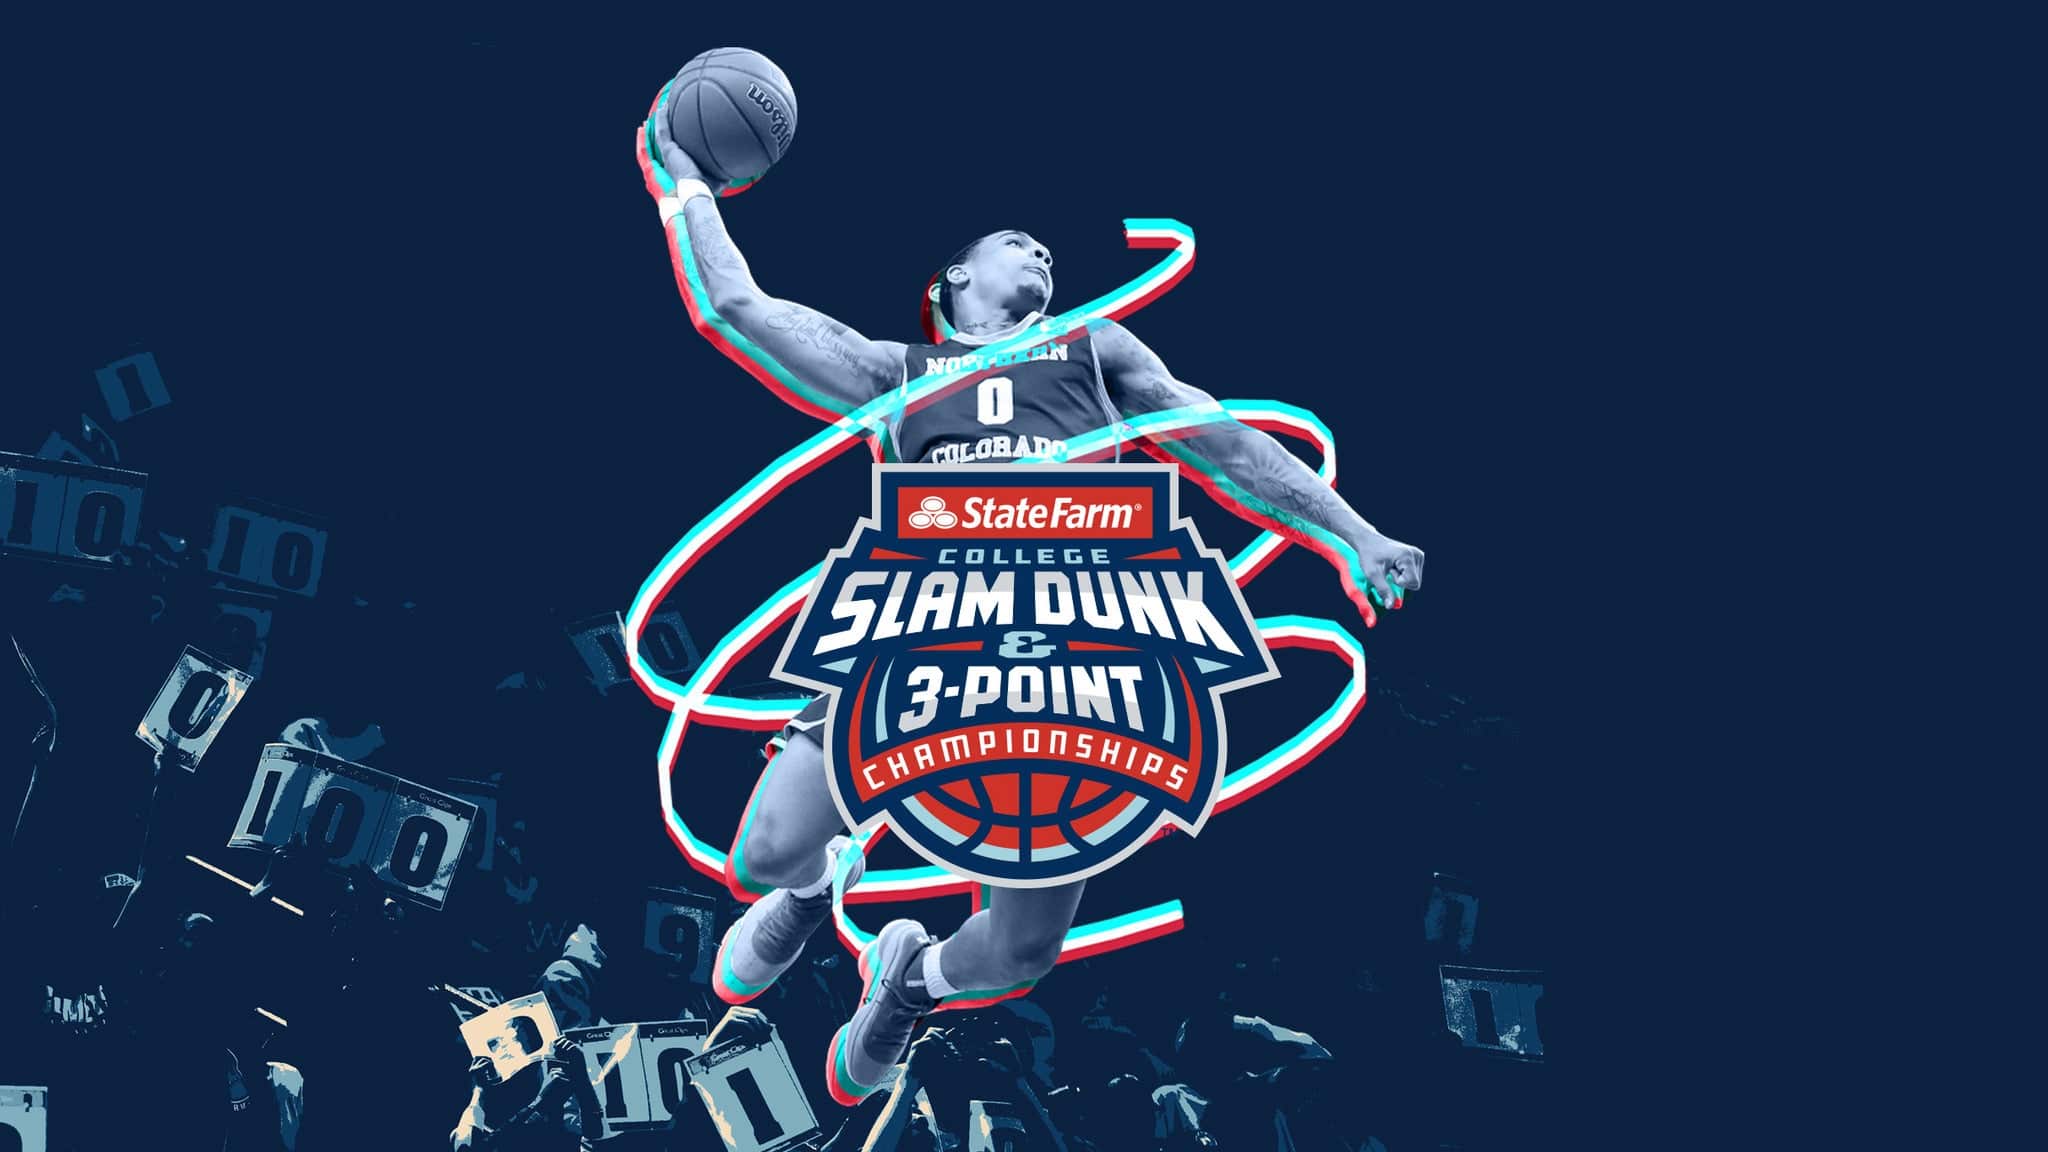 Hinkle Fieldhouse To Host 21 State Farm College Slam Dunk 3 Point Championships Wyrz Org